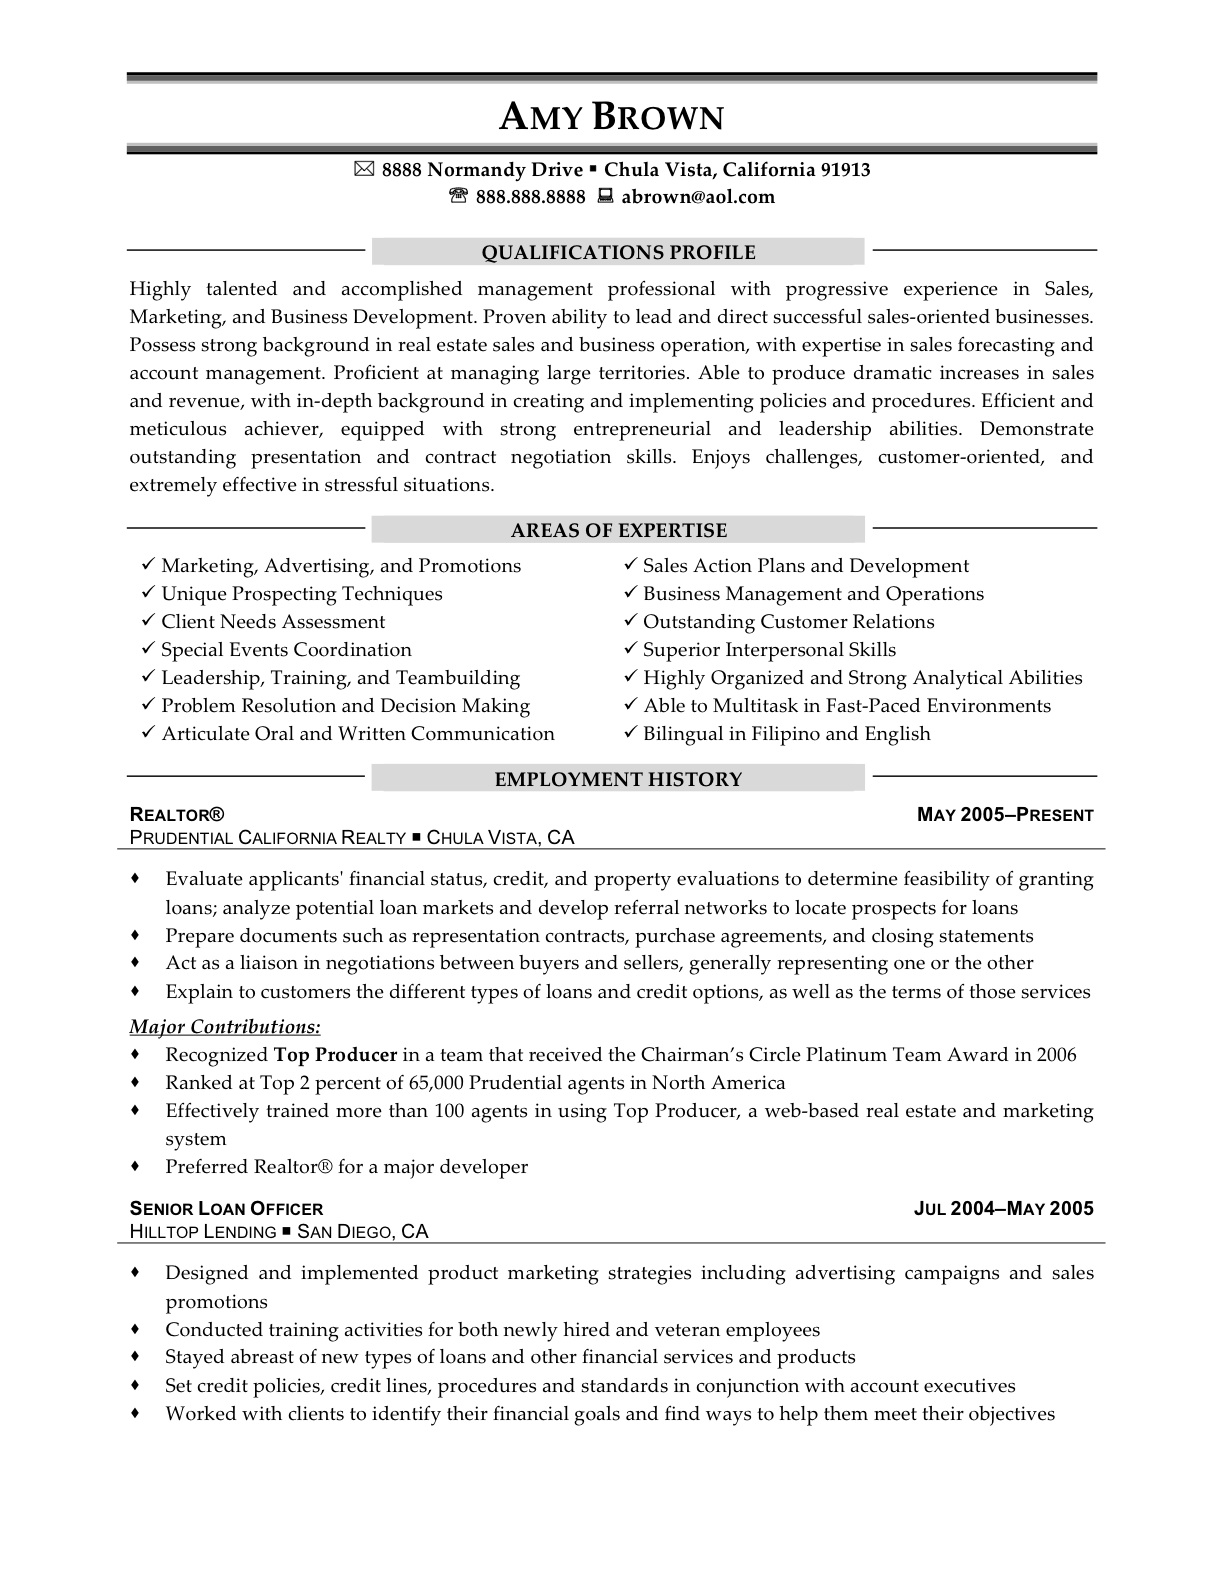 Sample resume residential counsellor